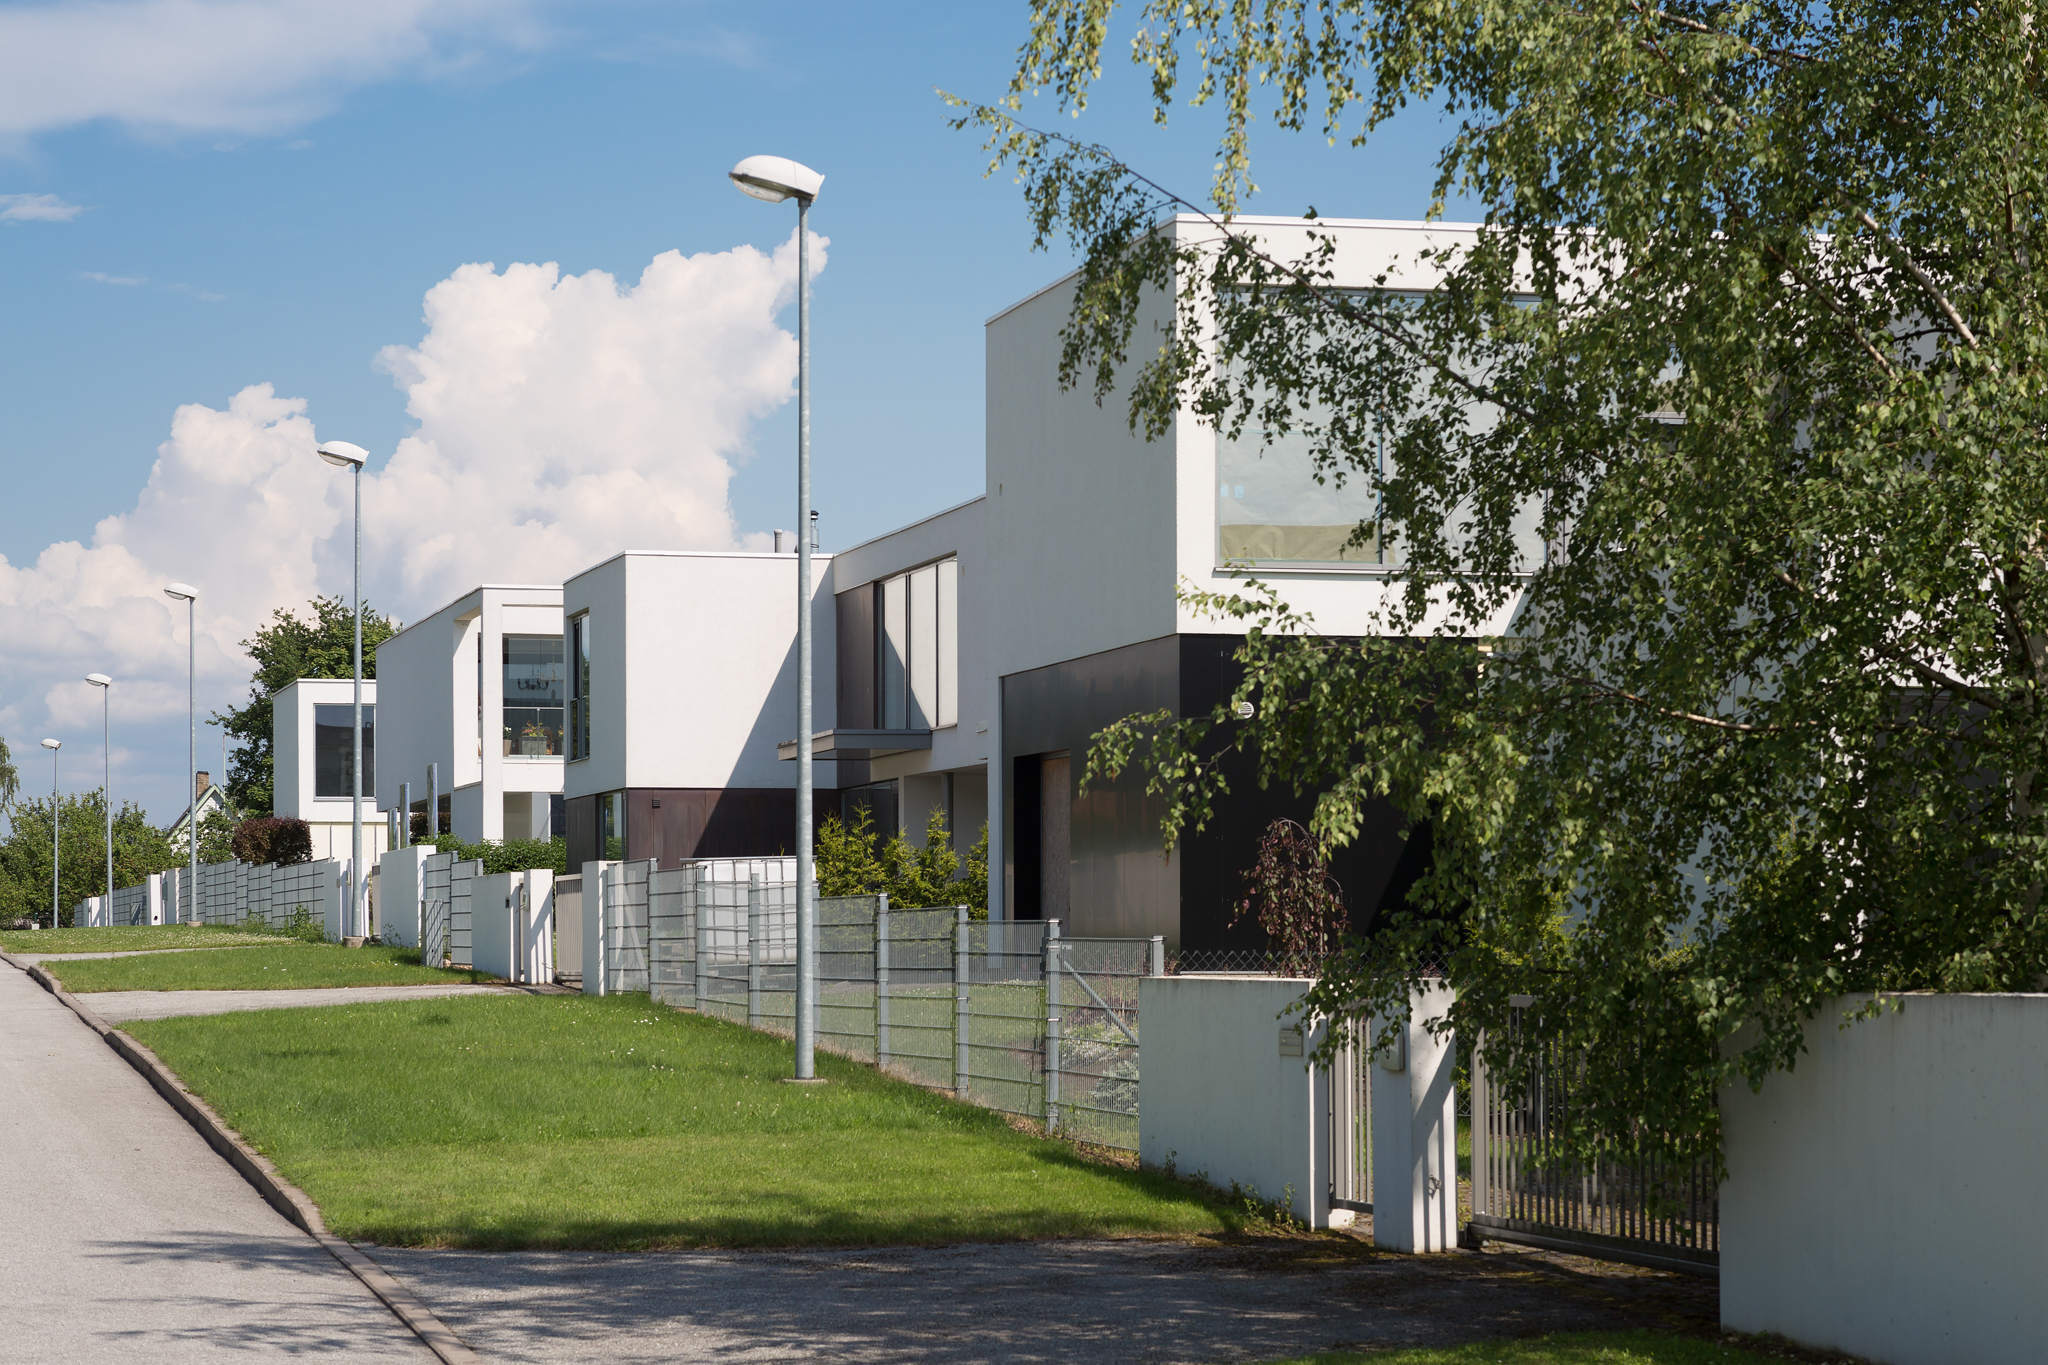 HOUSING AREA WITH 13 PRIVATE RESIDENCES IN VILJANDI